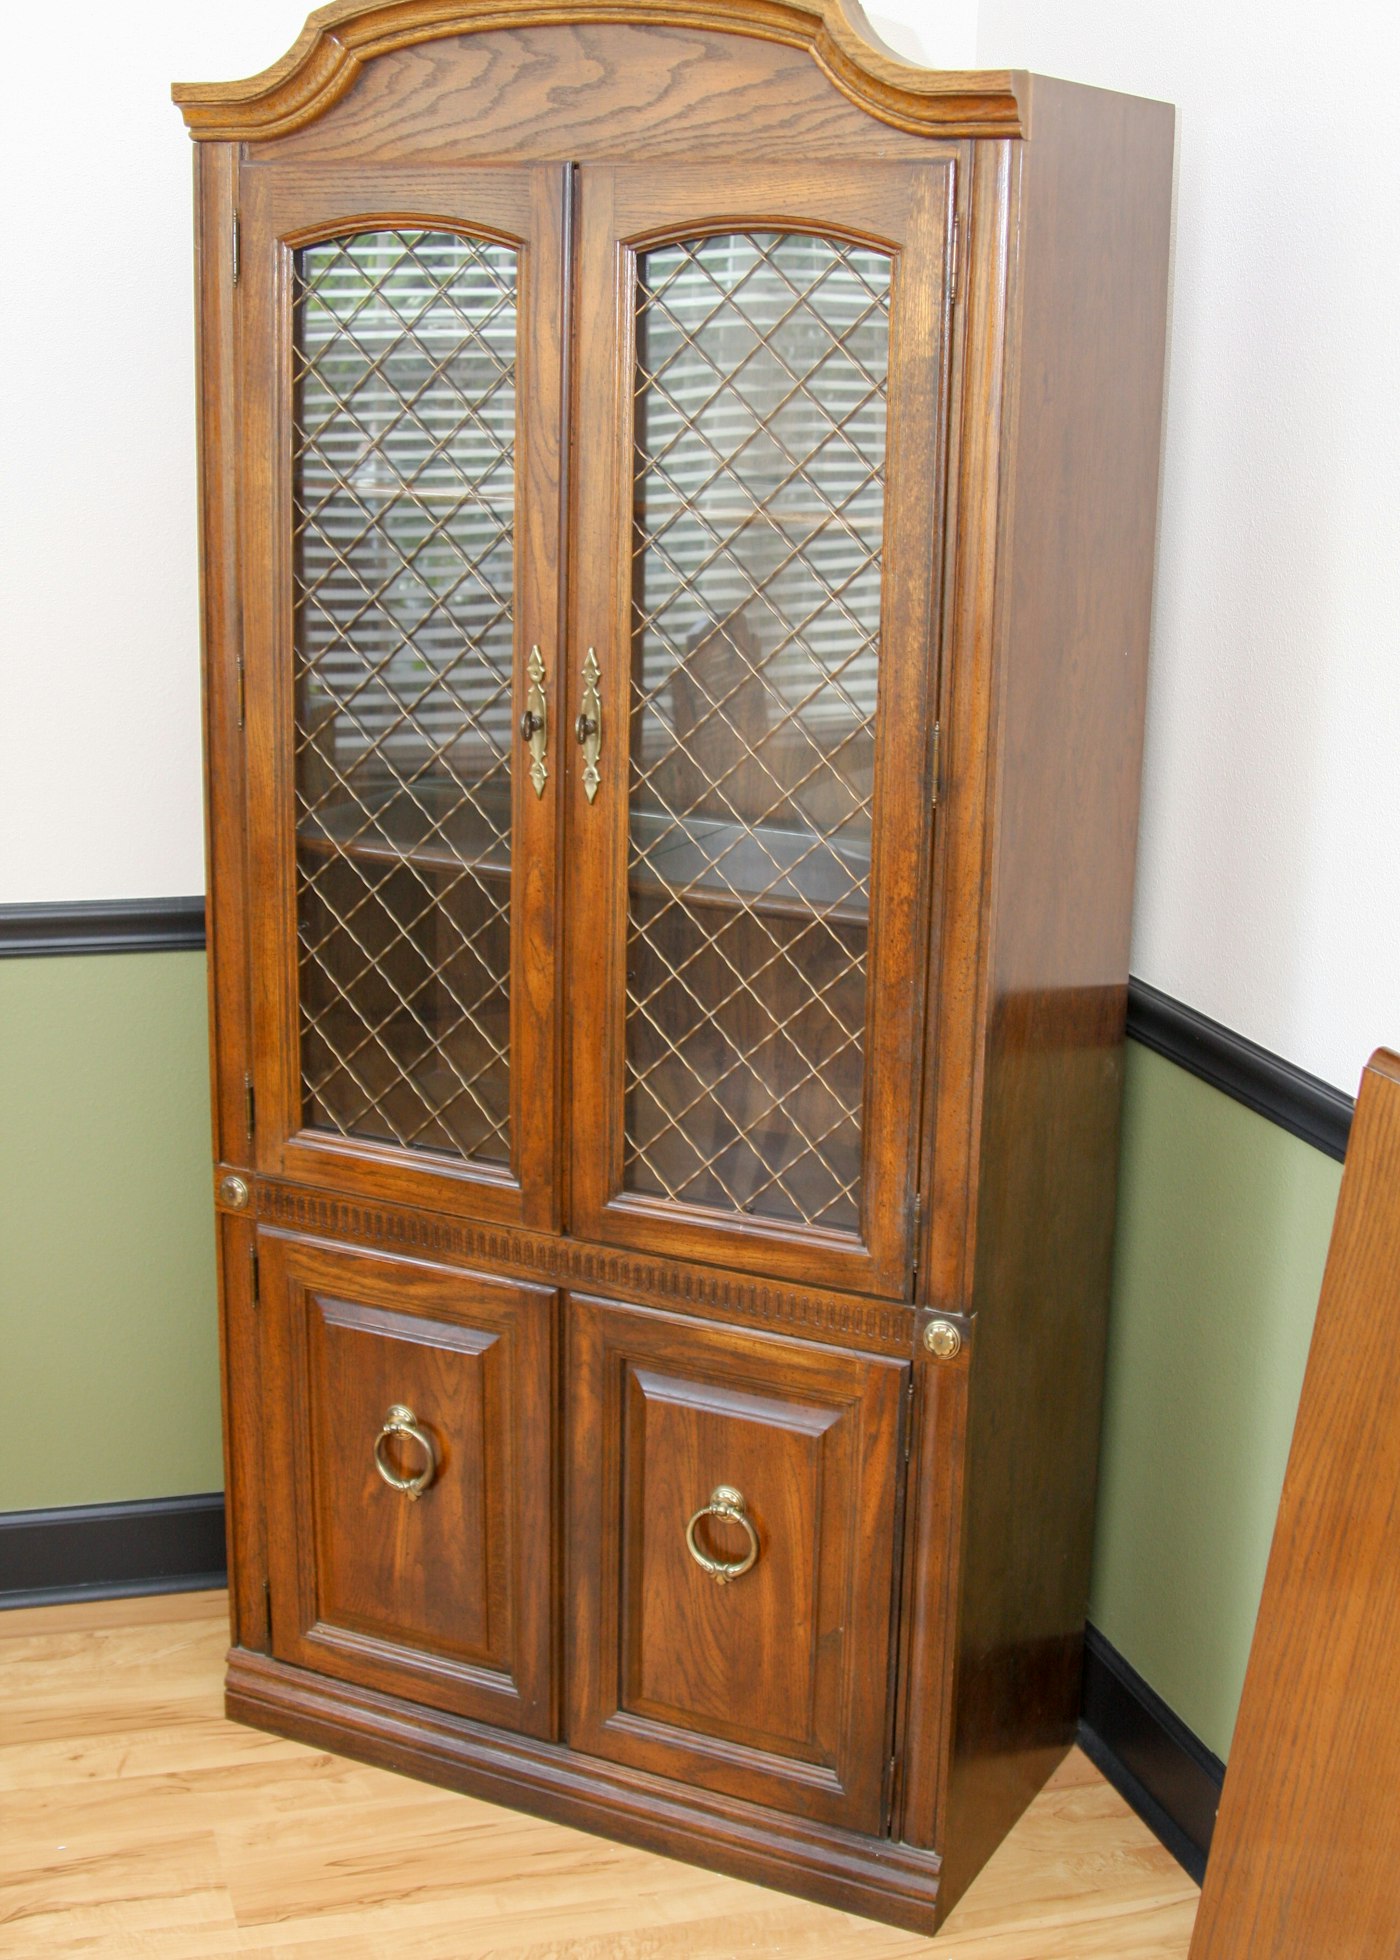 Vintage Aged Oak Finish China Cabinet With Wire Mesh Door ...